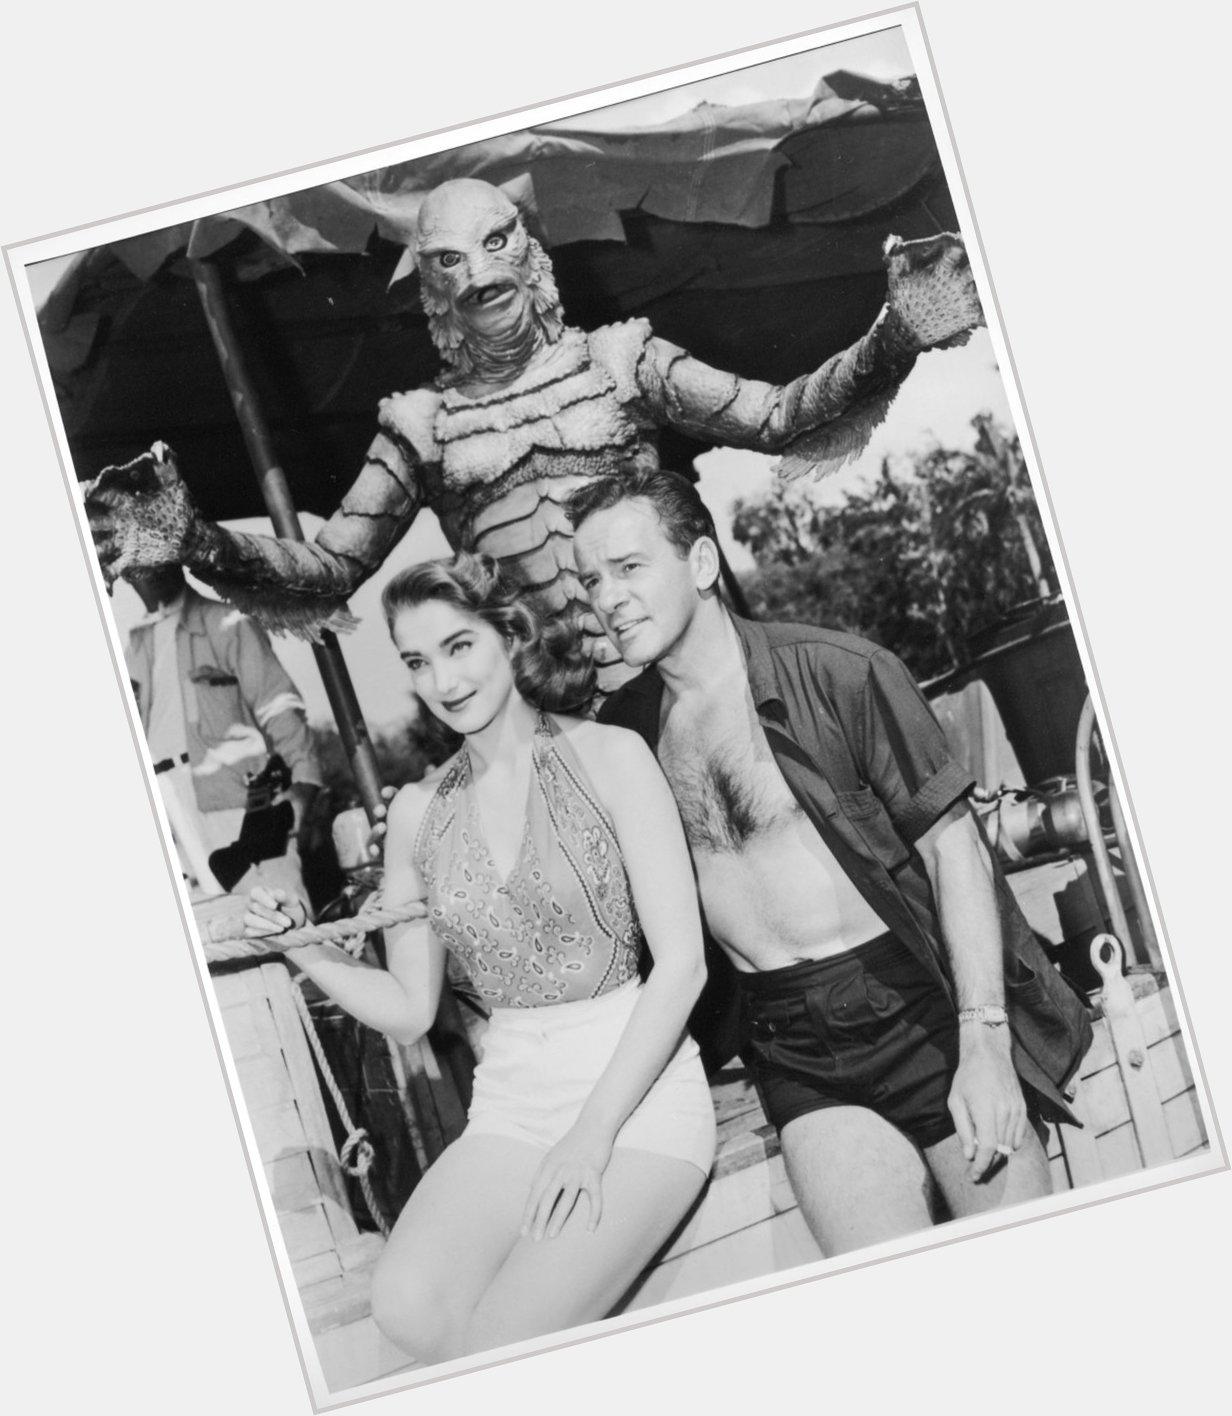 Happy Birthday to Richard Carlson! Here he is with Julie Adams and the Creature from the Black Lagoon. 